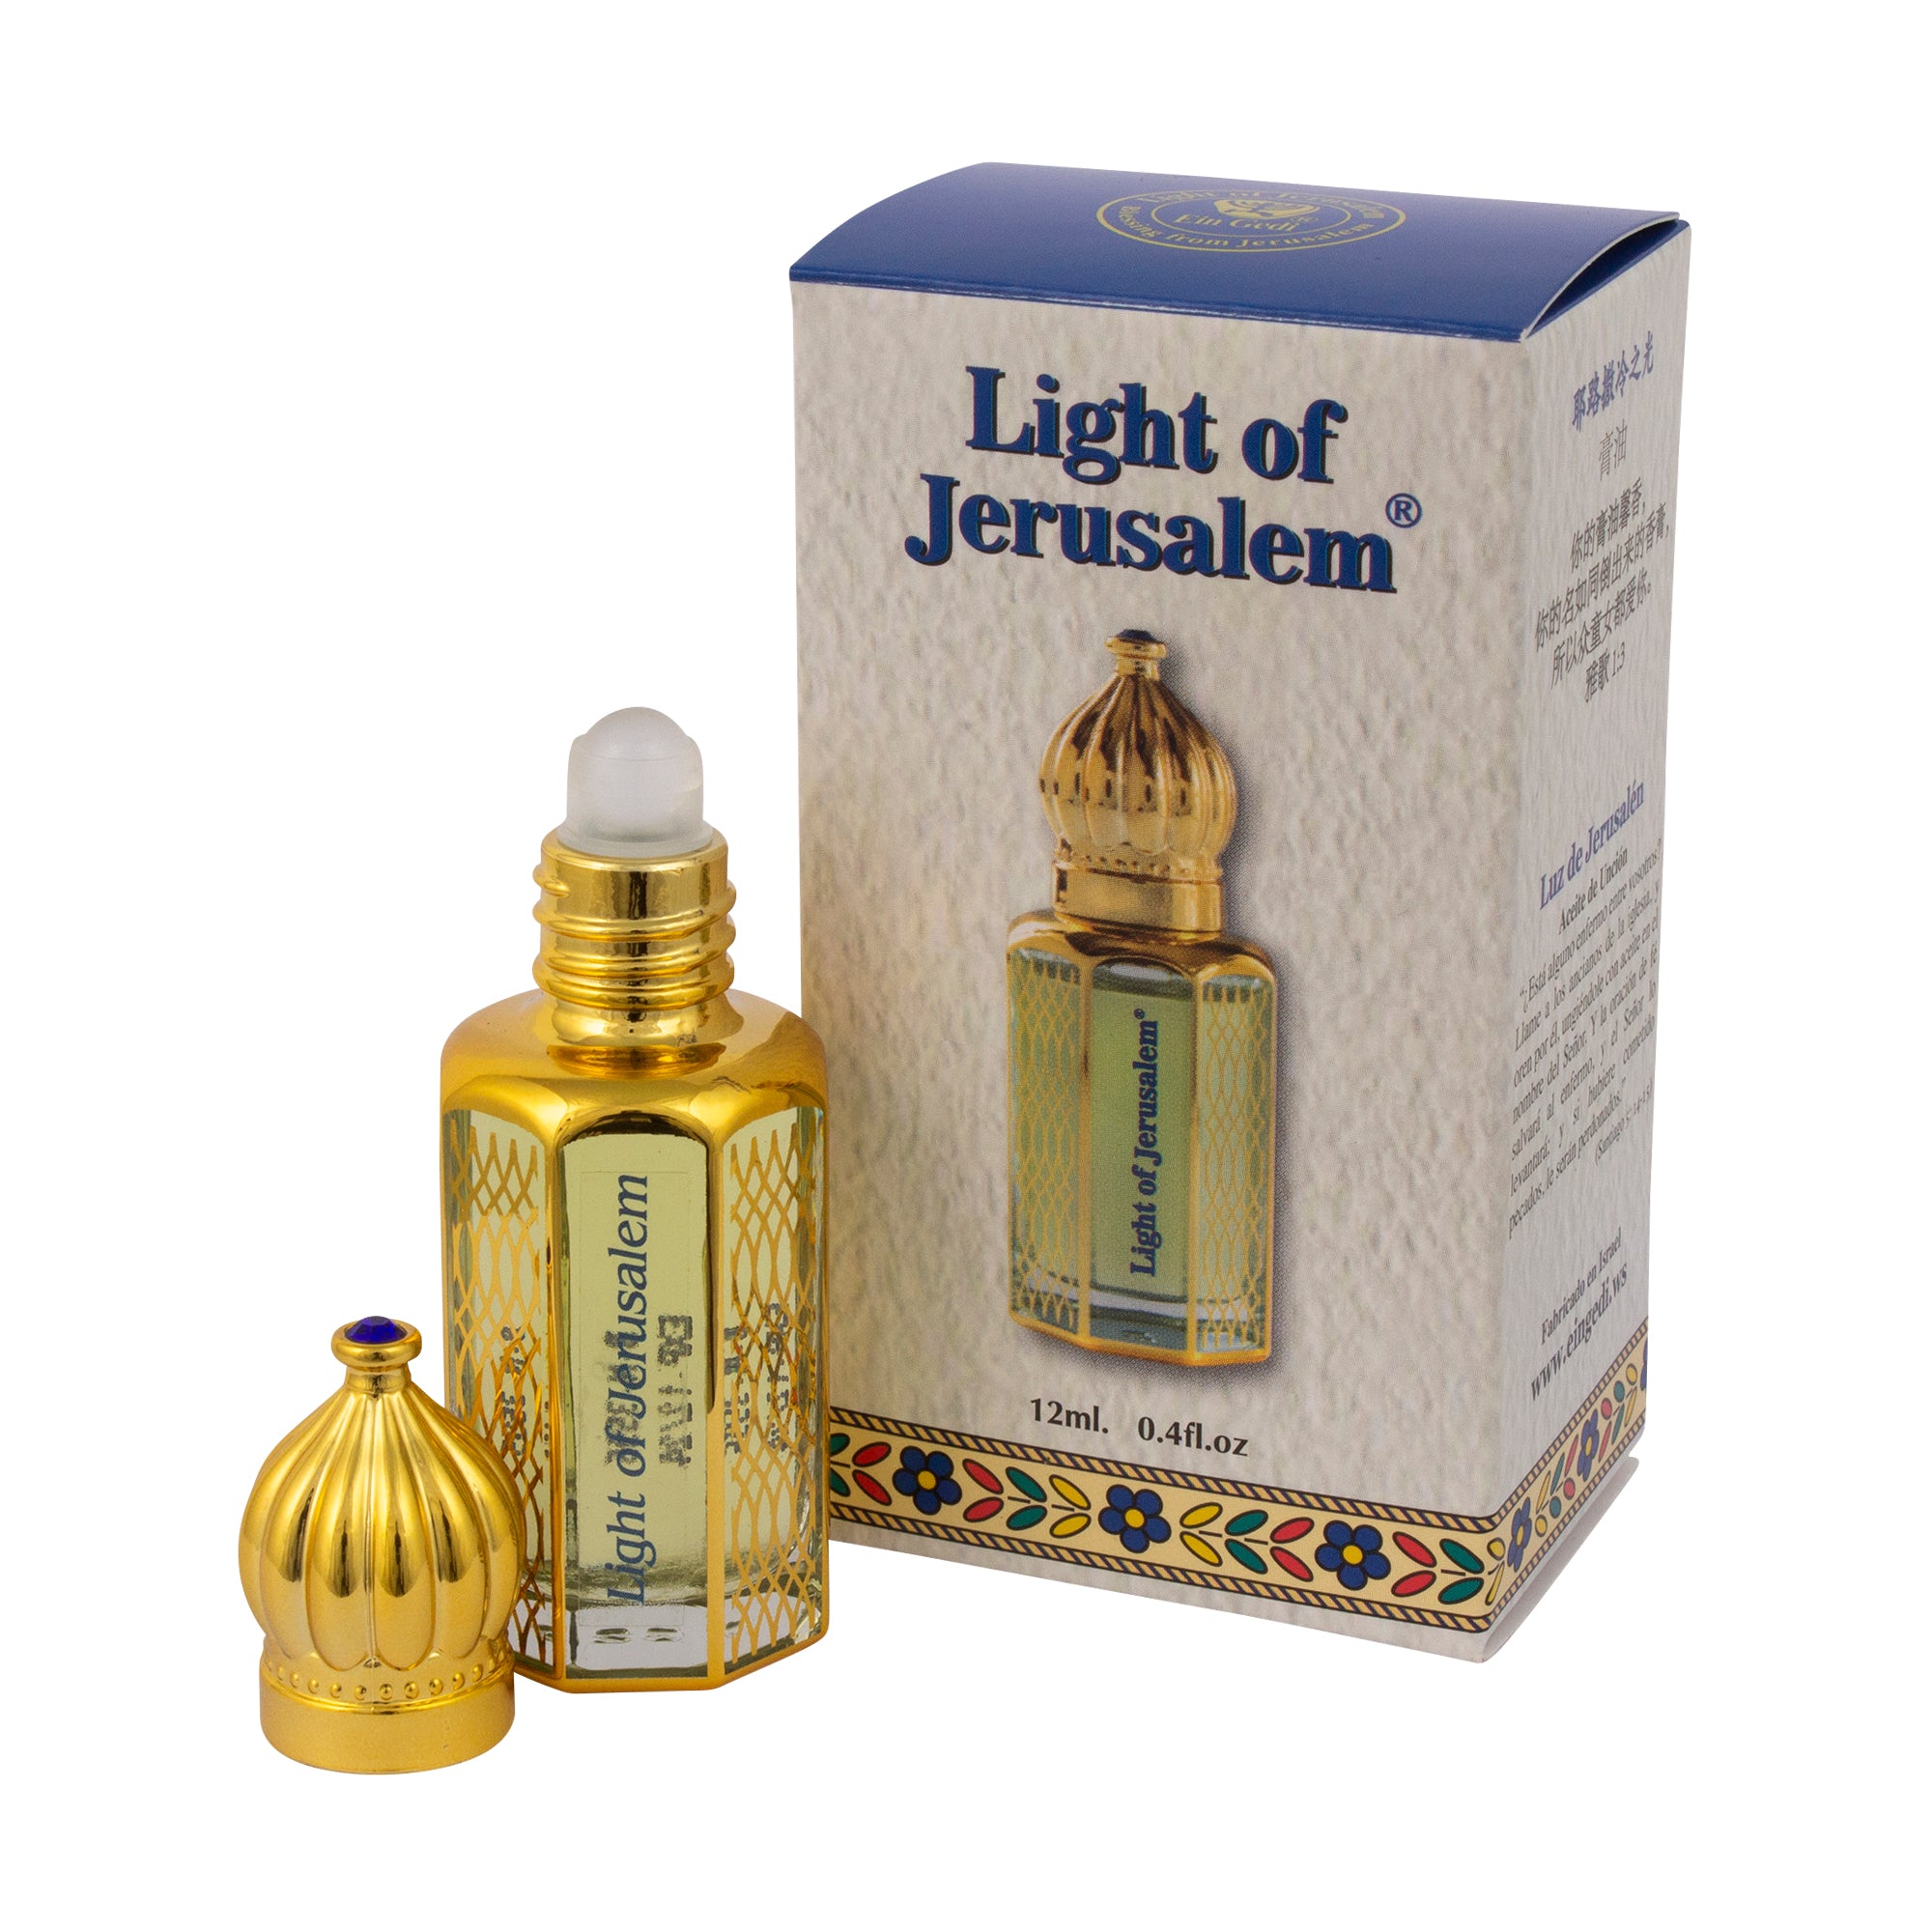 Symposium Lejlighedsvis vi Light of Jerusalem Aromatic Prayer Anointing Oil Bible from Holy Land – The  Peace Of God®